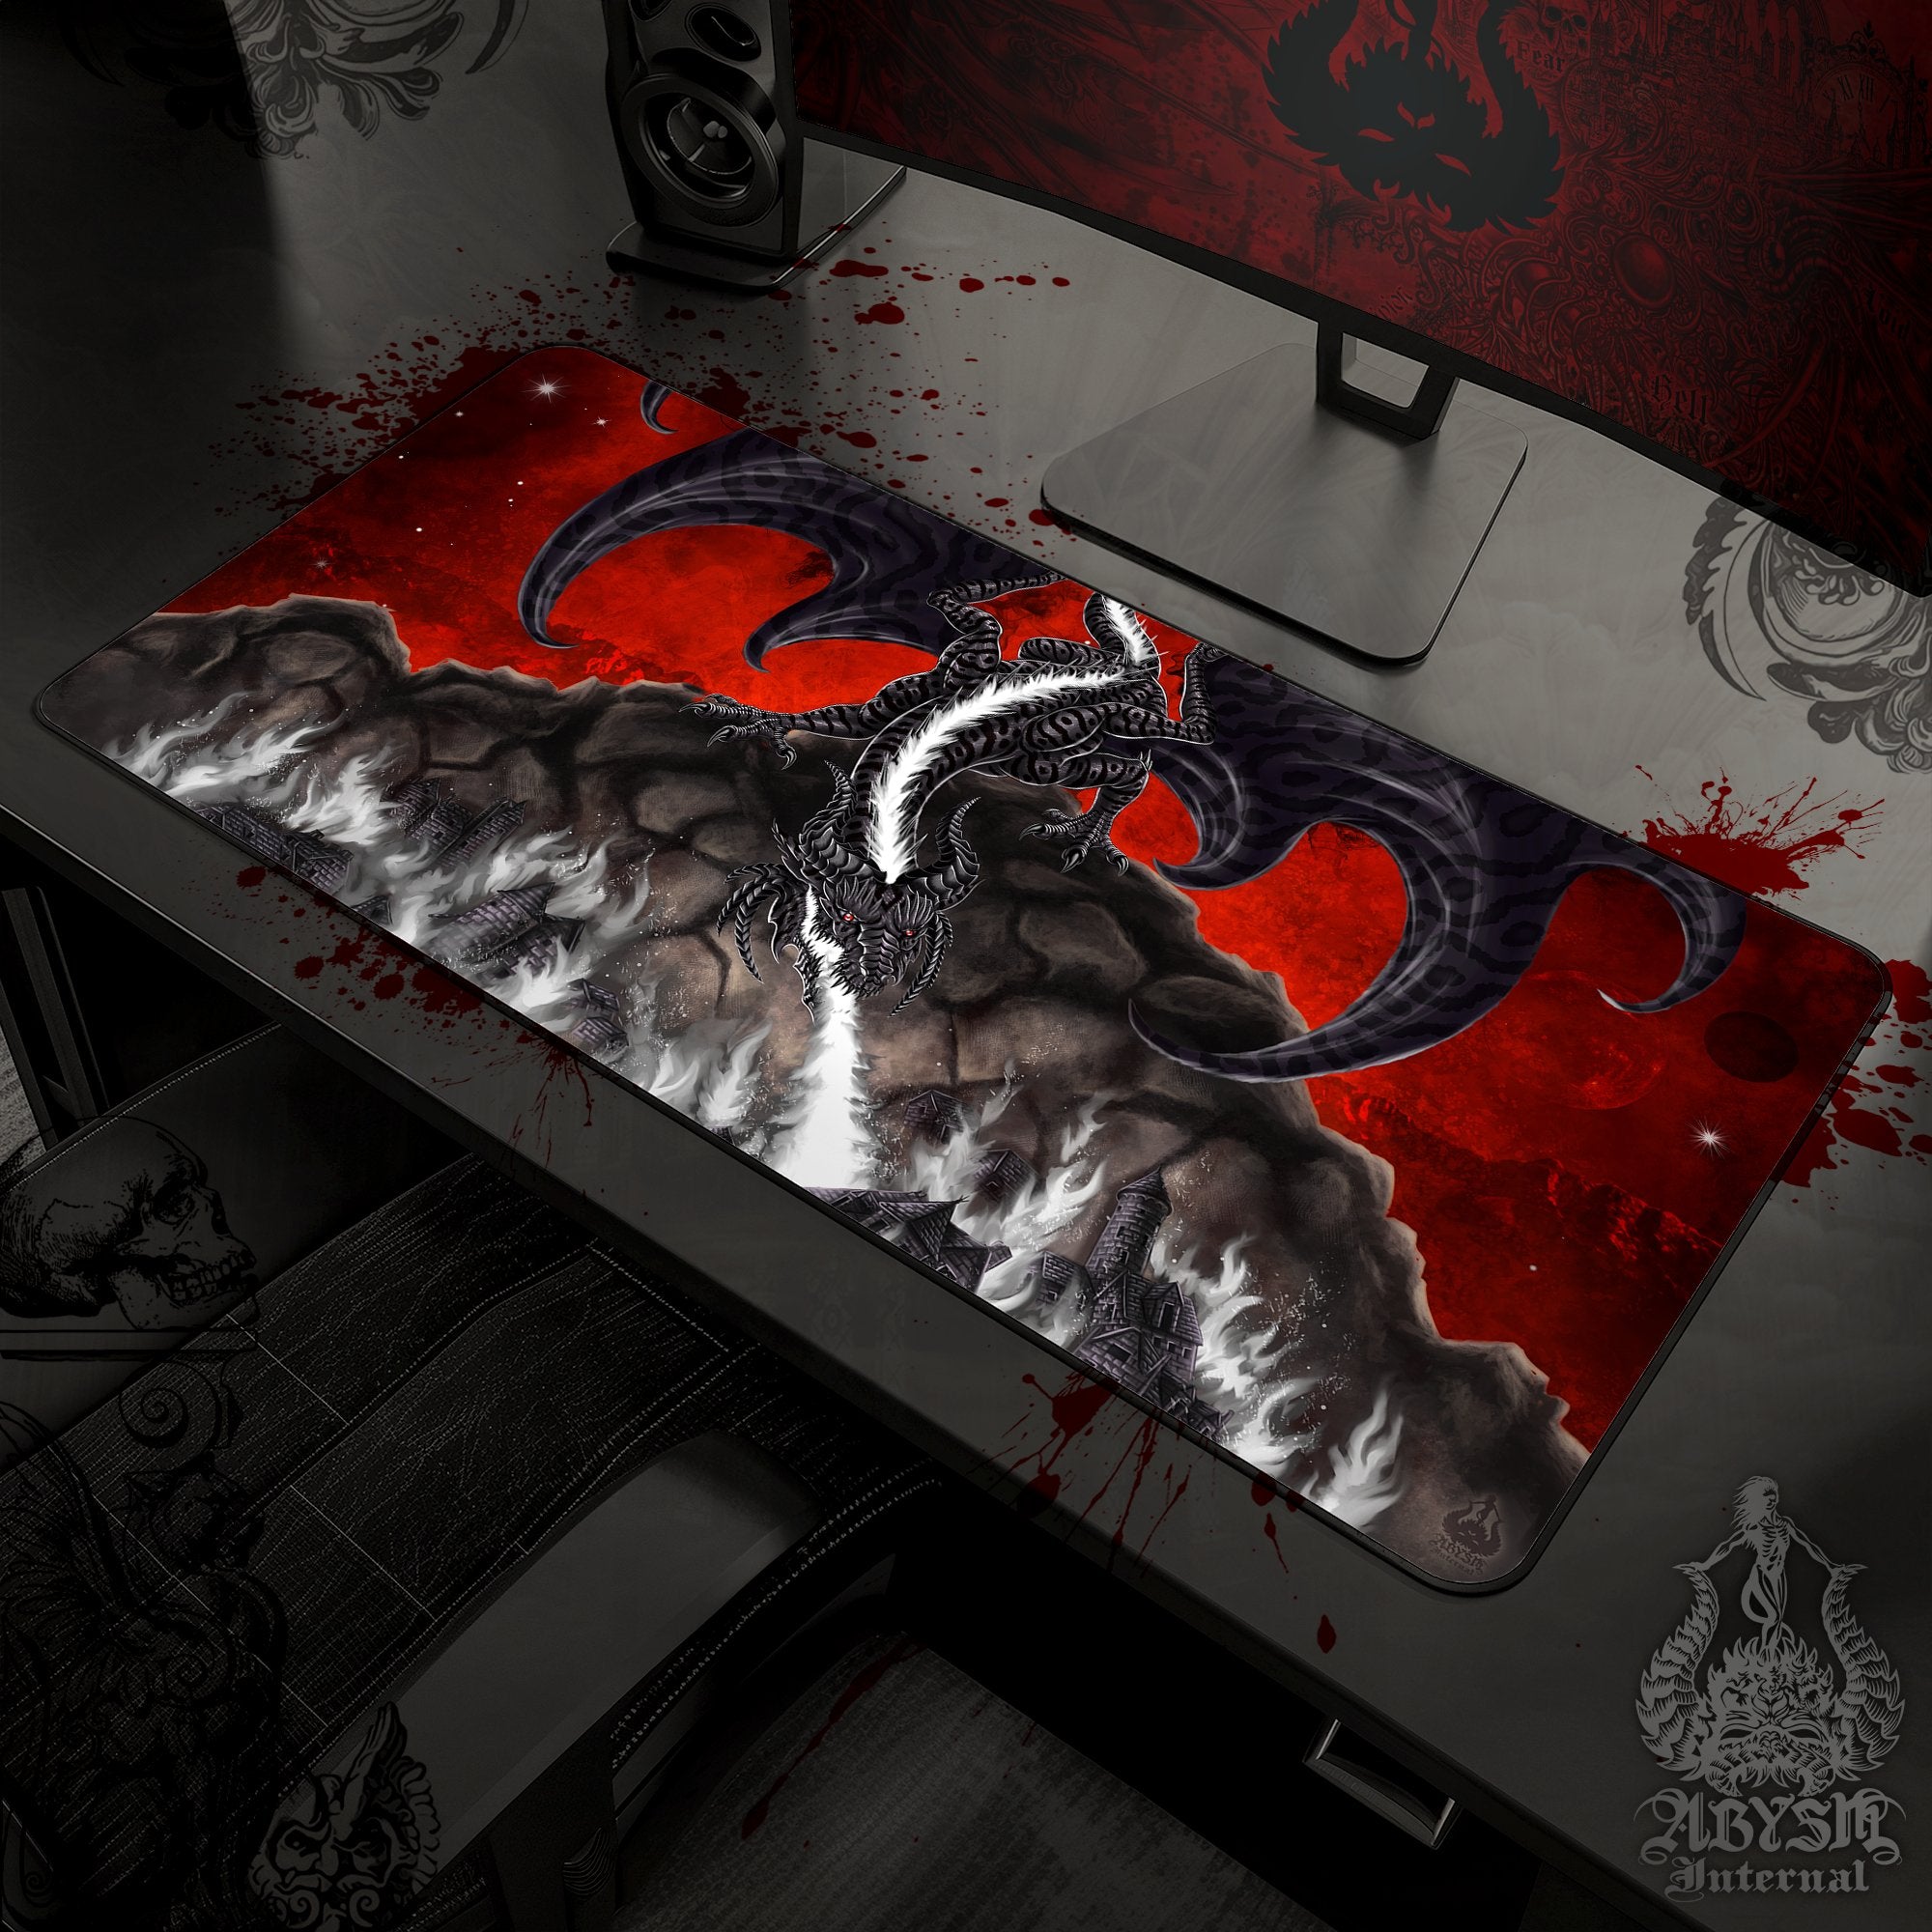 Dragon Desk Mat, Fantasy Art Gaming Mouse Pad, Red, White and Black Table Protector Cover, RPG Workpad, DM Gift Print - Fire - Abysm Internal